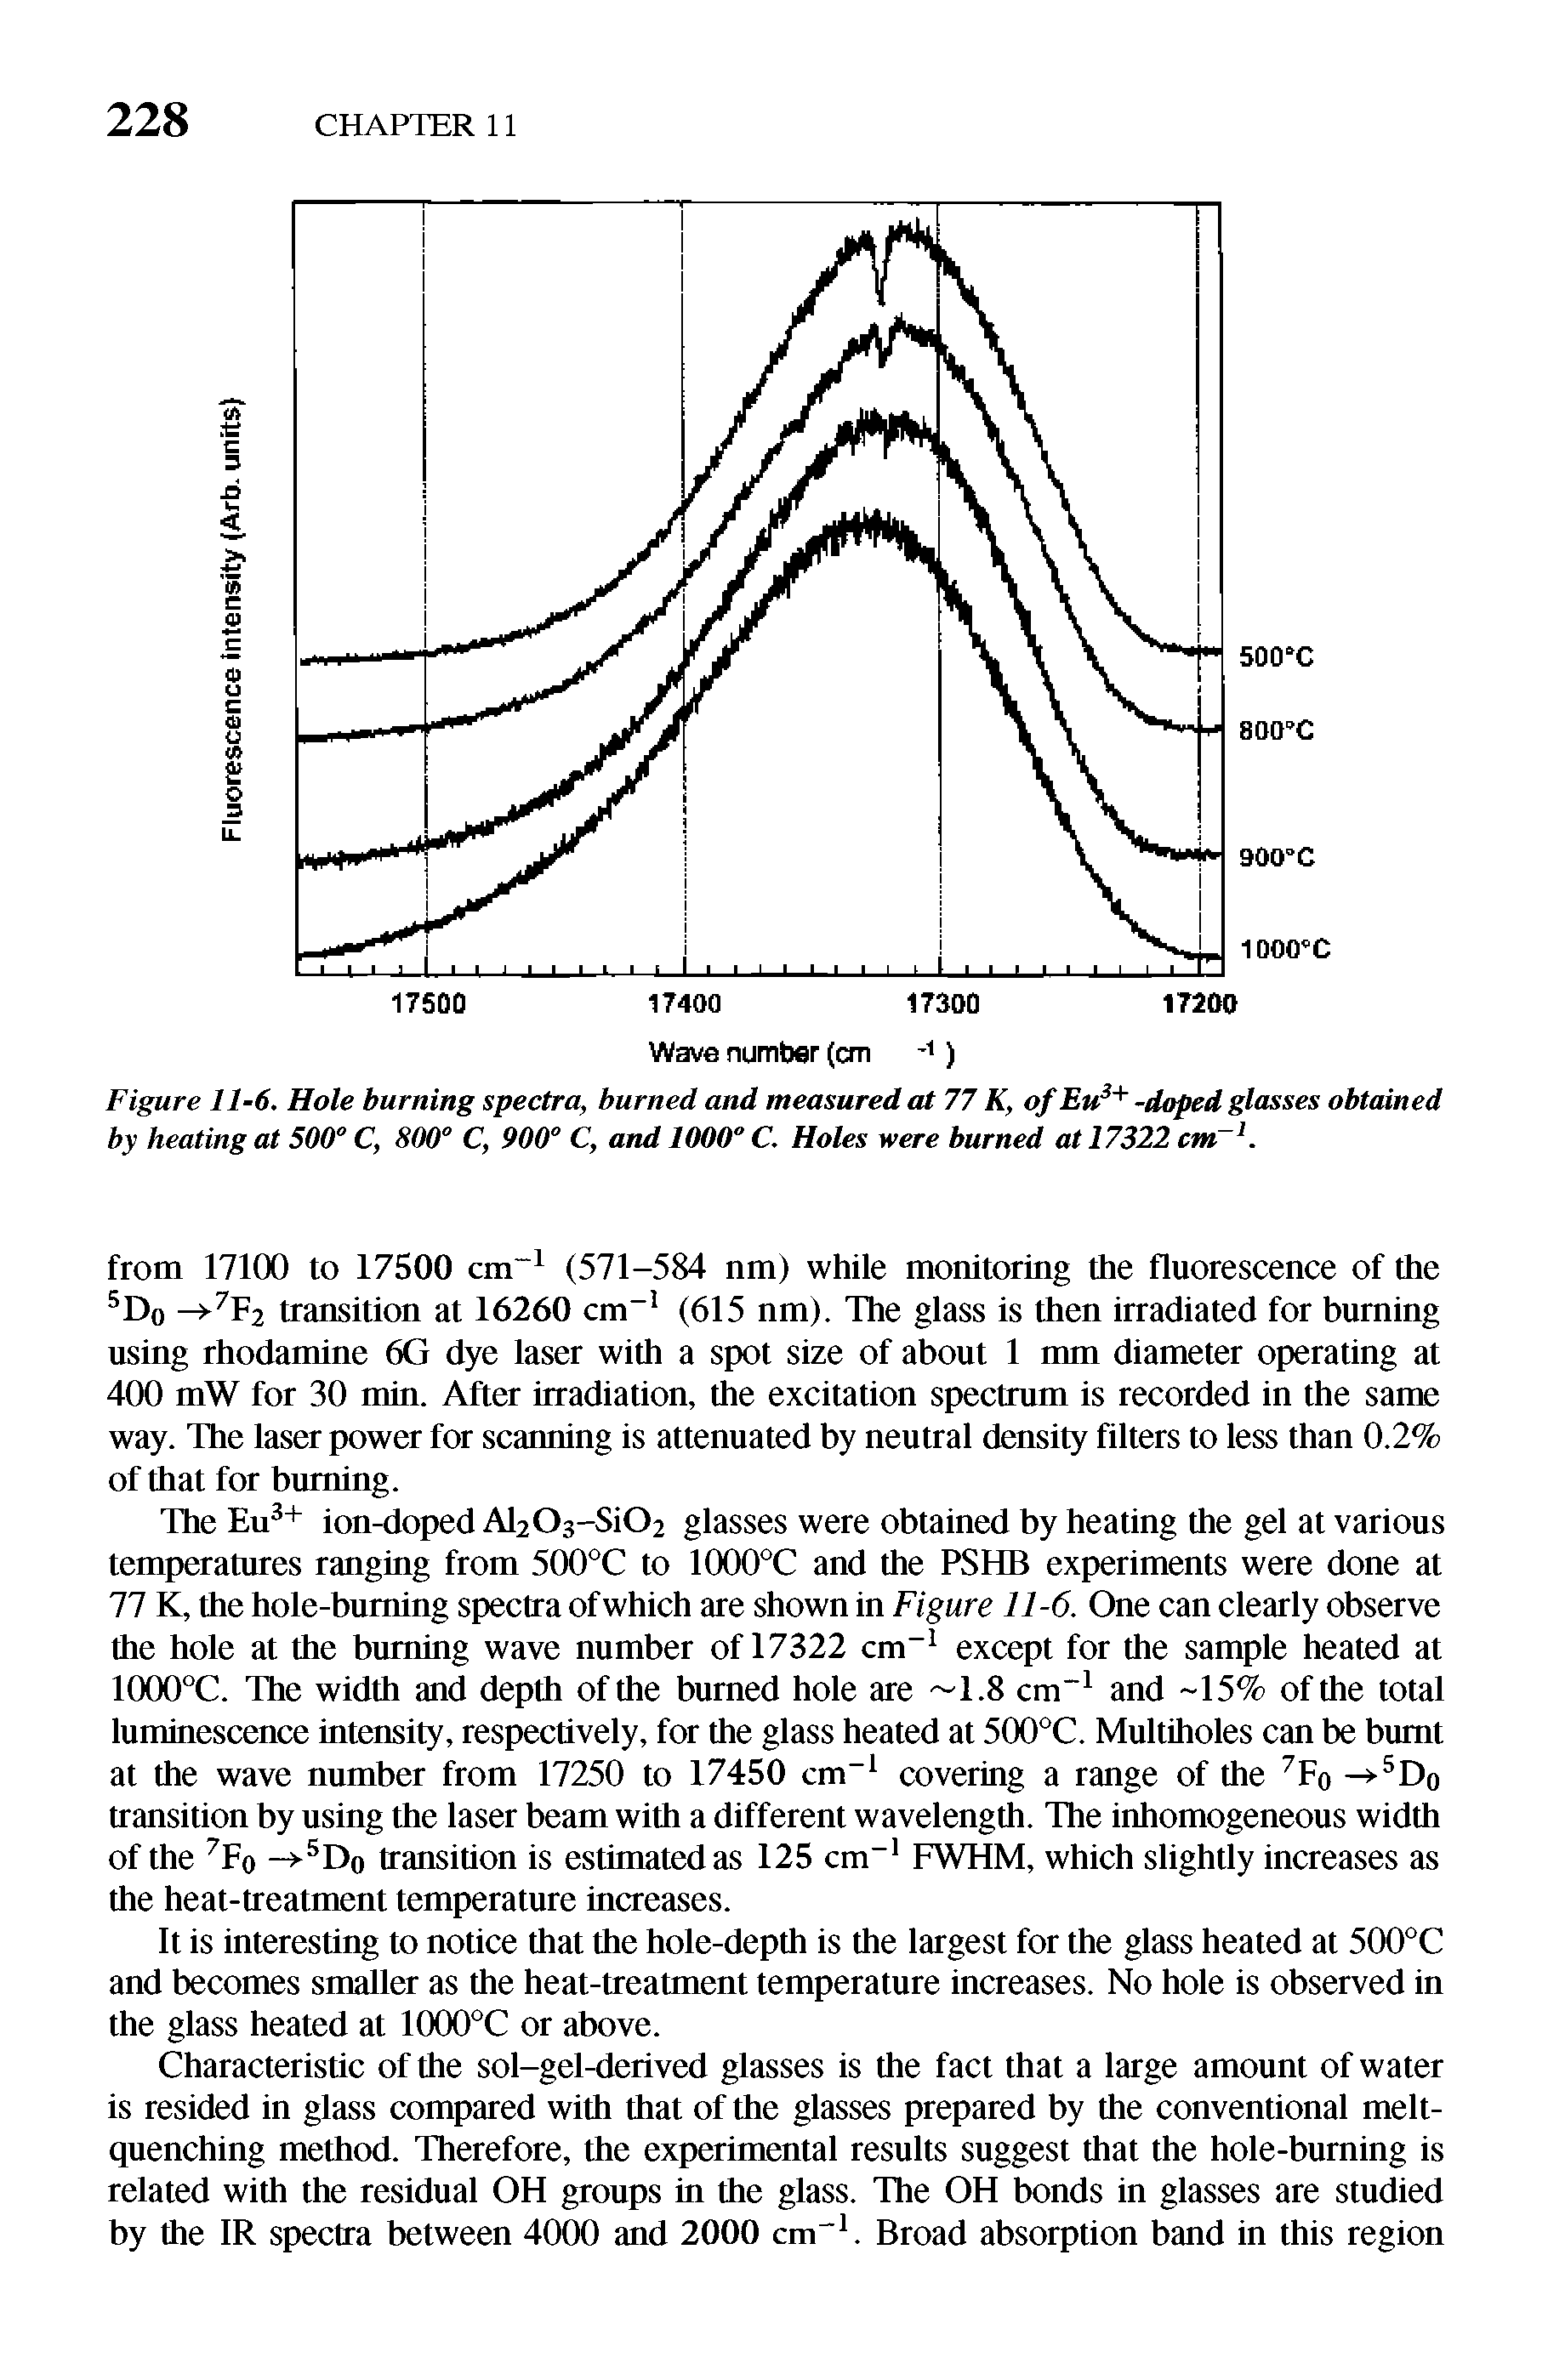 Figure 11-6. Hole burning spectra, burned and measured at 77 K, of Eu -doped glasses obtained by heating at 500° C, 800° C, 900° C, and 1000° C. Holes were burned at 17322 cm. ...